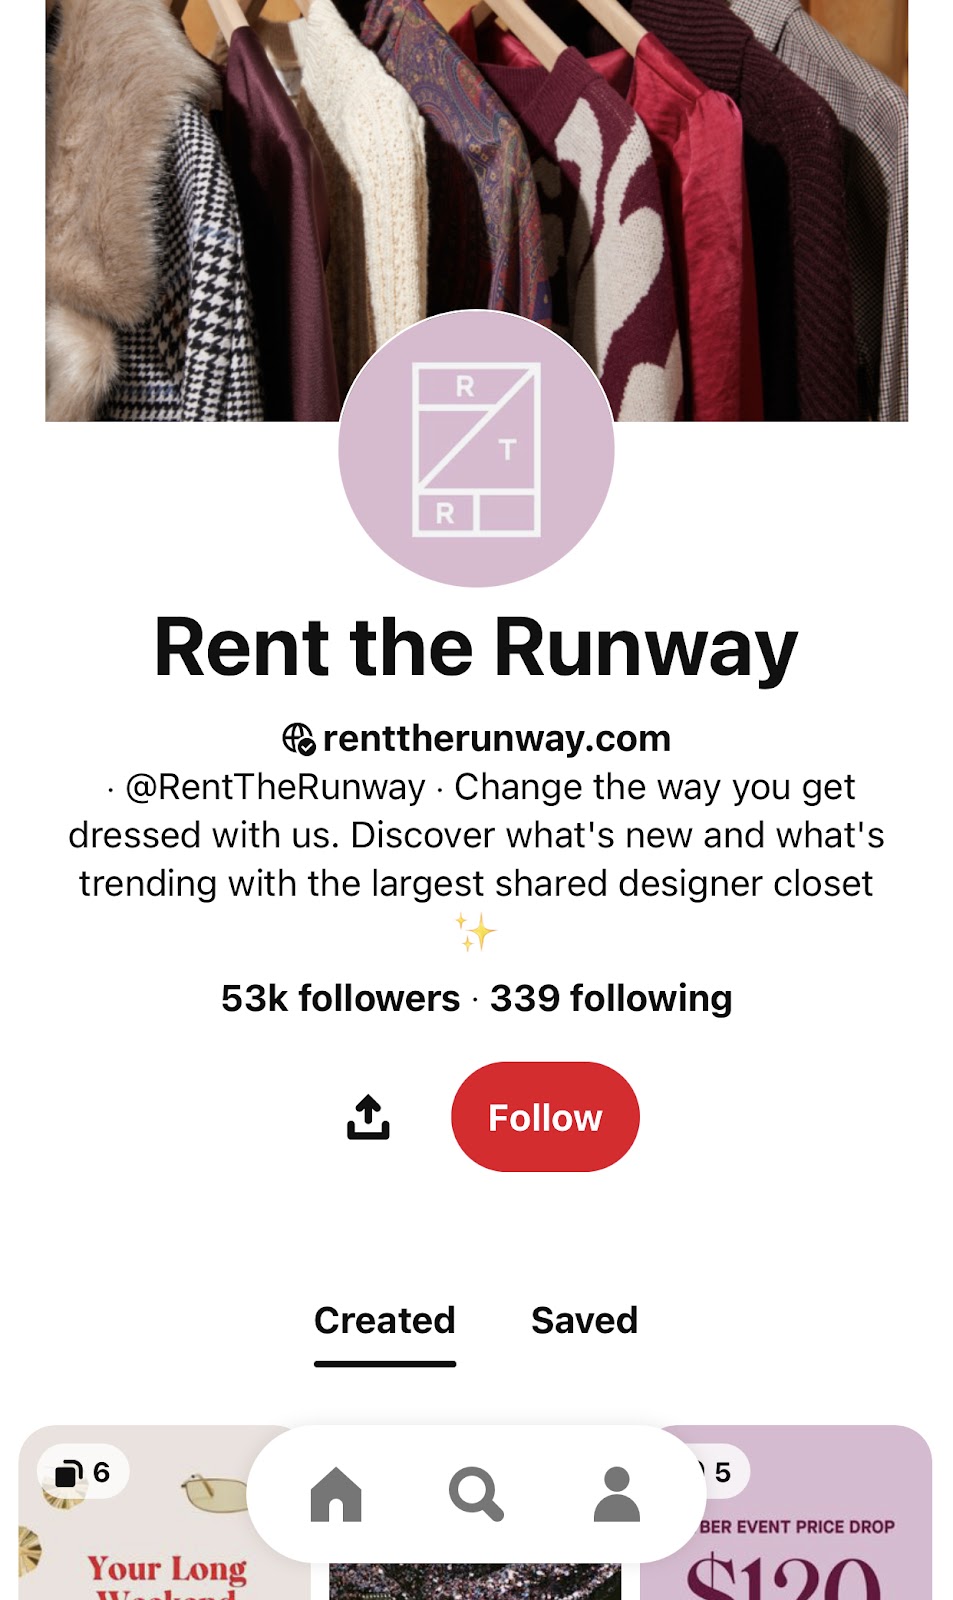 How Brands Connect With Consumers on Pinterest - Net Influencer